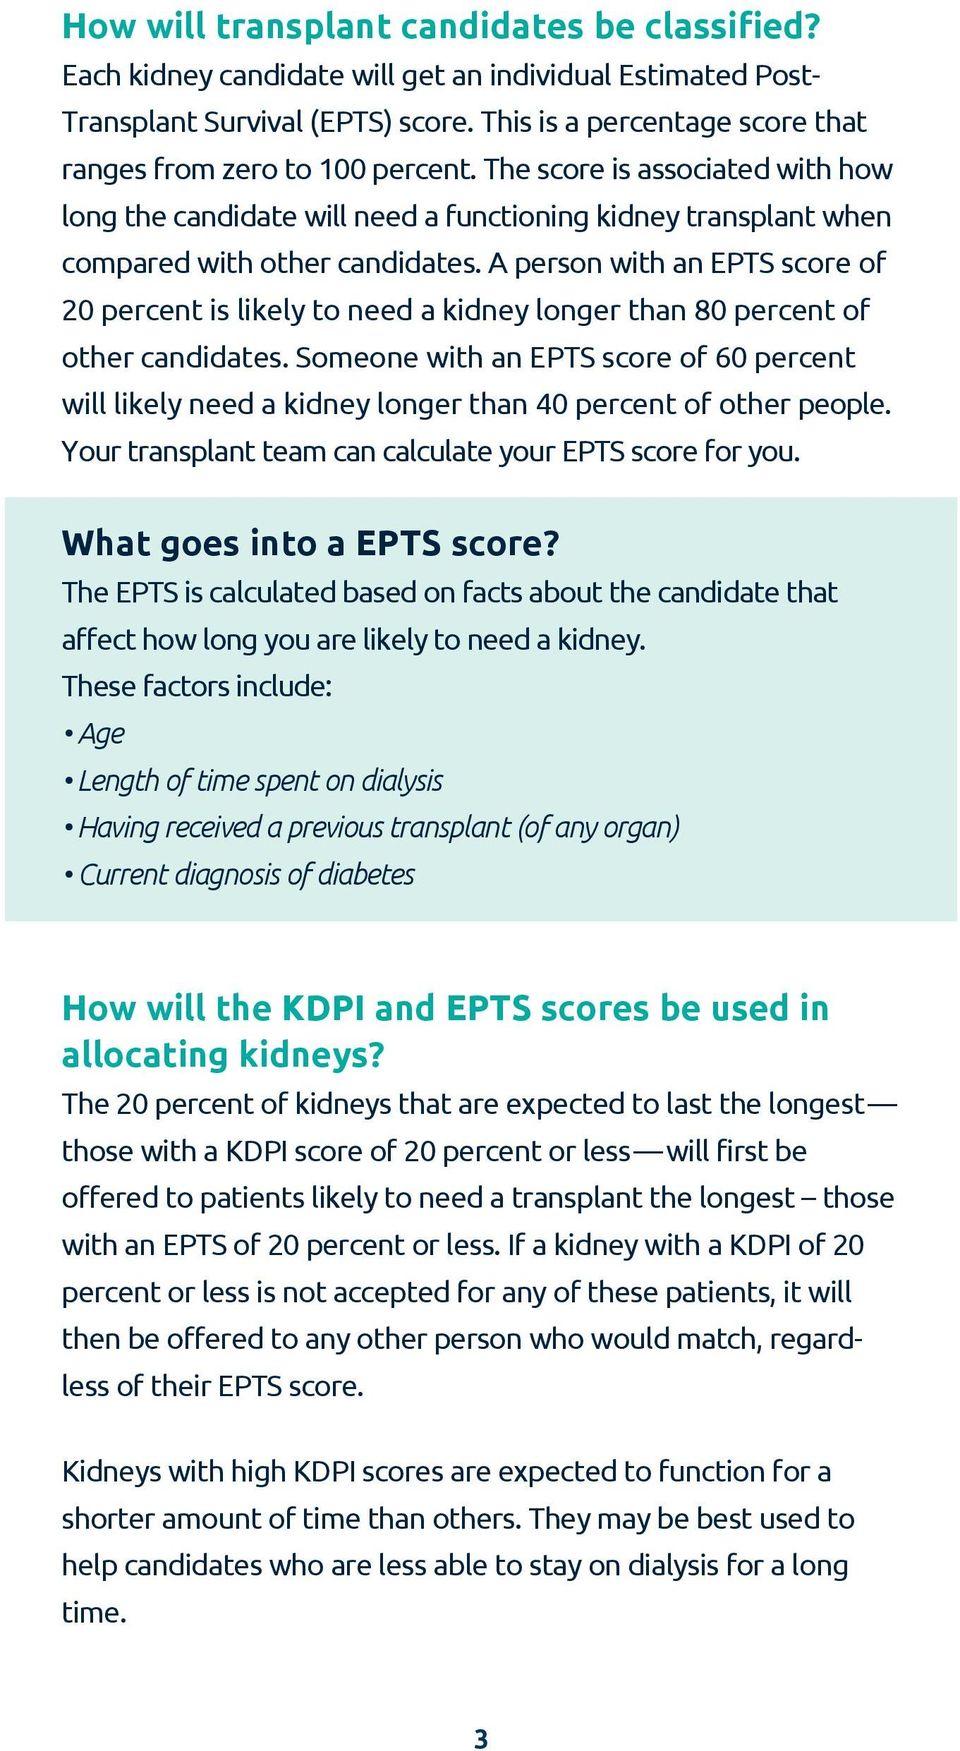 A person with an EPTS score of 20 percent is likely to need a kidney longer than 80 percent of other candidates.